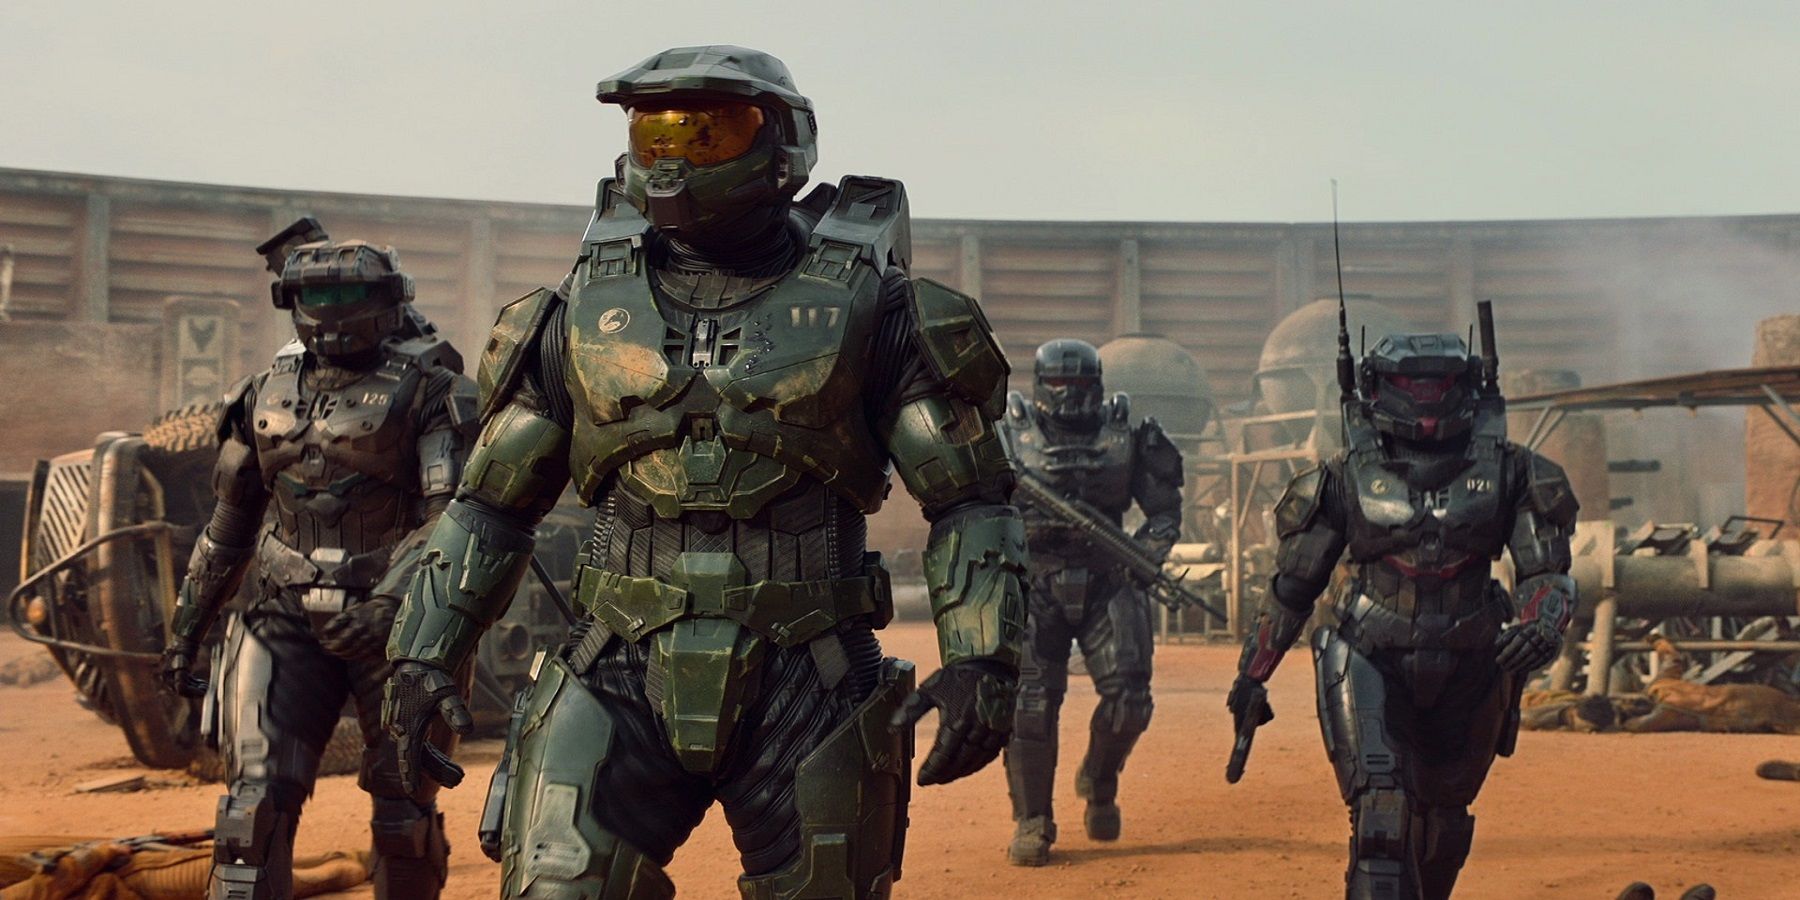 The new Halo TV series has a small nod to Spongebob Squarepants in its second episode.